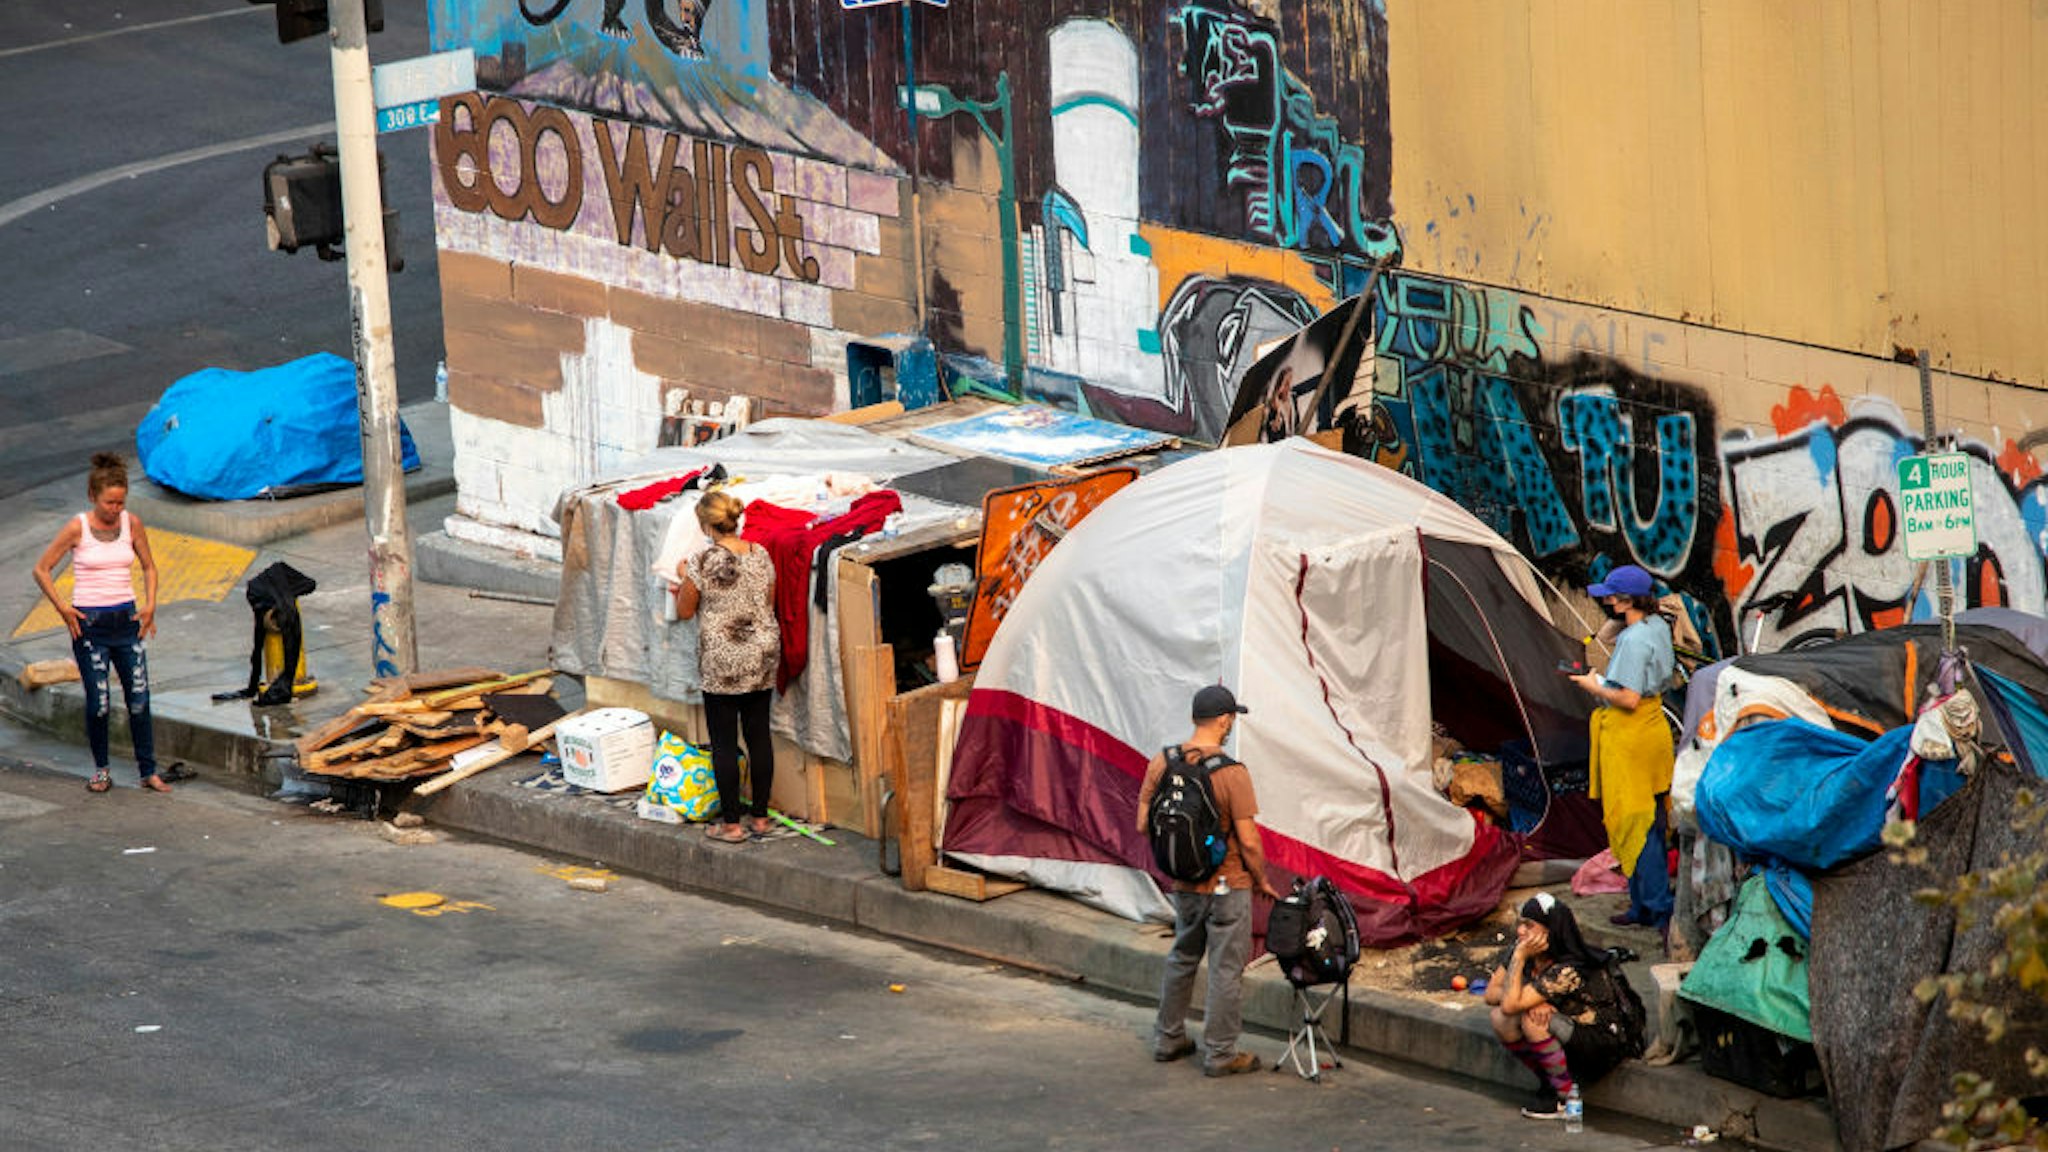 Los Angeles, CA - September 23: A view of a homeless encampment on Skid Row on Thursday, Sept. 23, 2021 in Los Angeles, CA. A federal appeals court on Thursday unanimously overturned a a judge's decision that would have required Los Angeles to offer some form of shelter or housing to the entire homeless population of skid row by October. (Allen J. Schaben / Los Angeles Times via Getty Images)